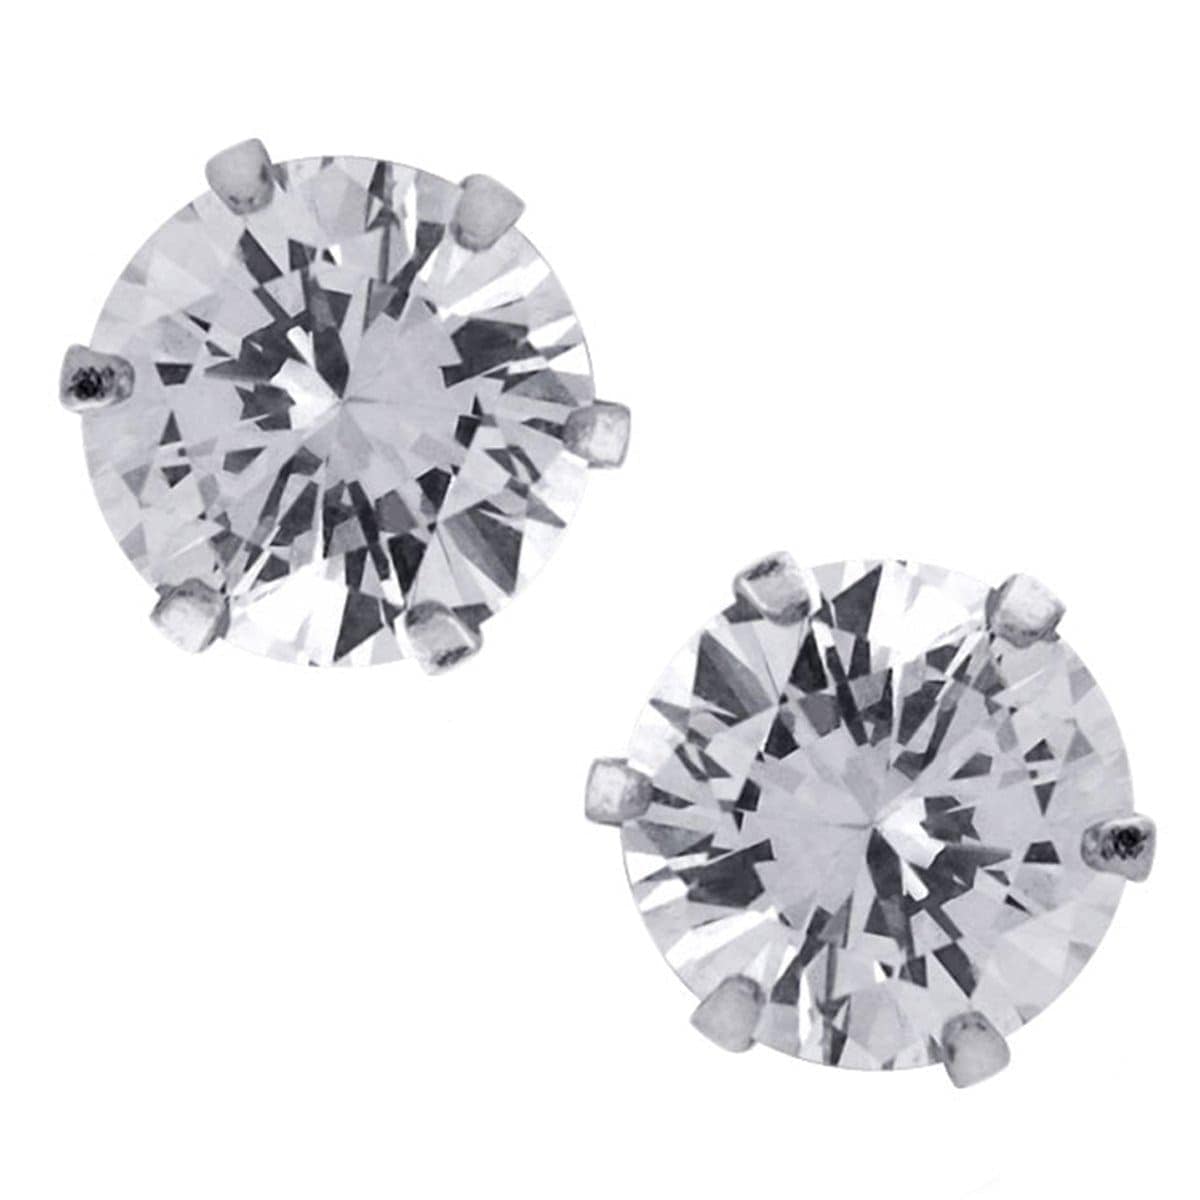 INOX JEWELRY Earrings Silver Tone Stainless Steel Six Prong CZ Solitaire Studs